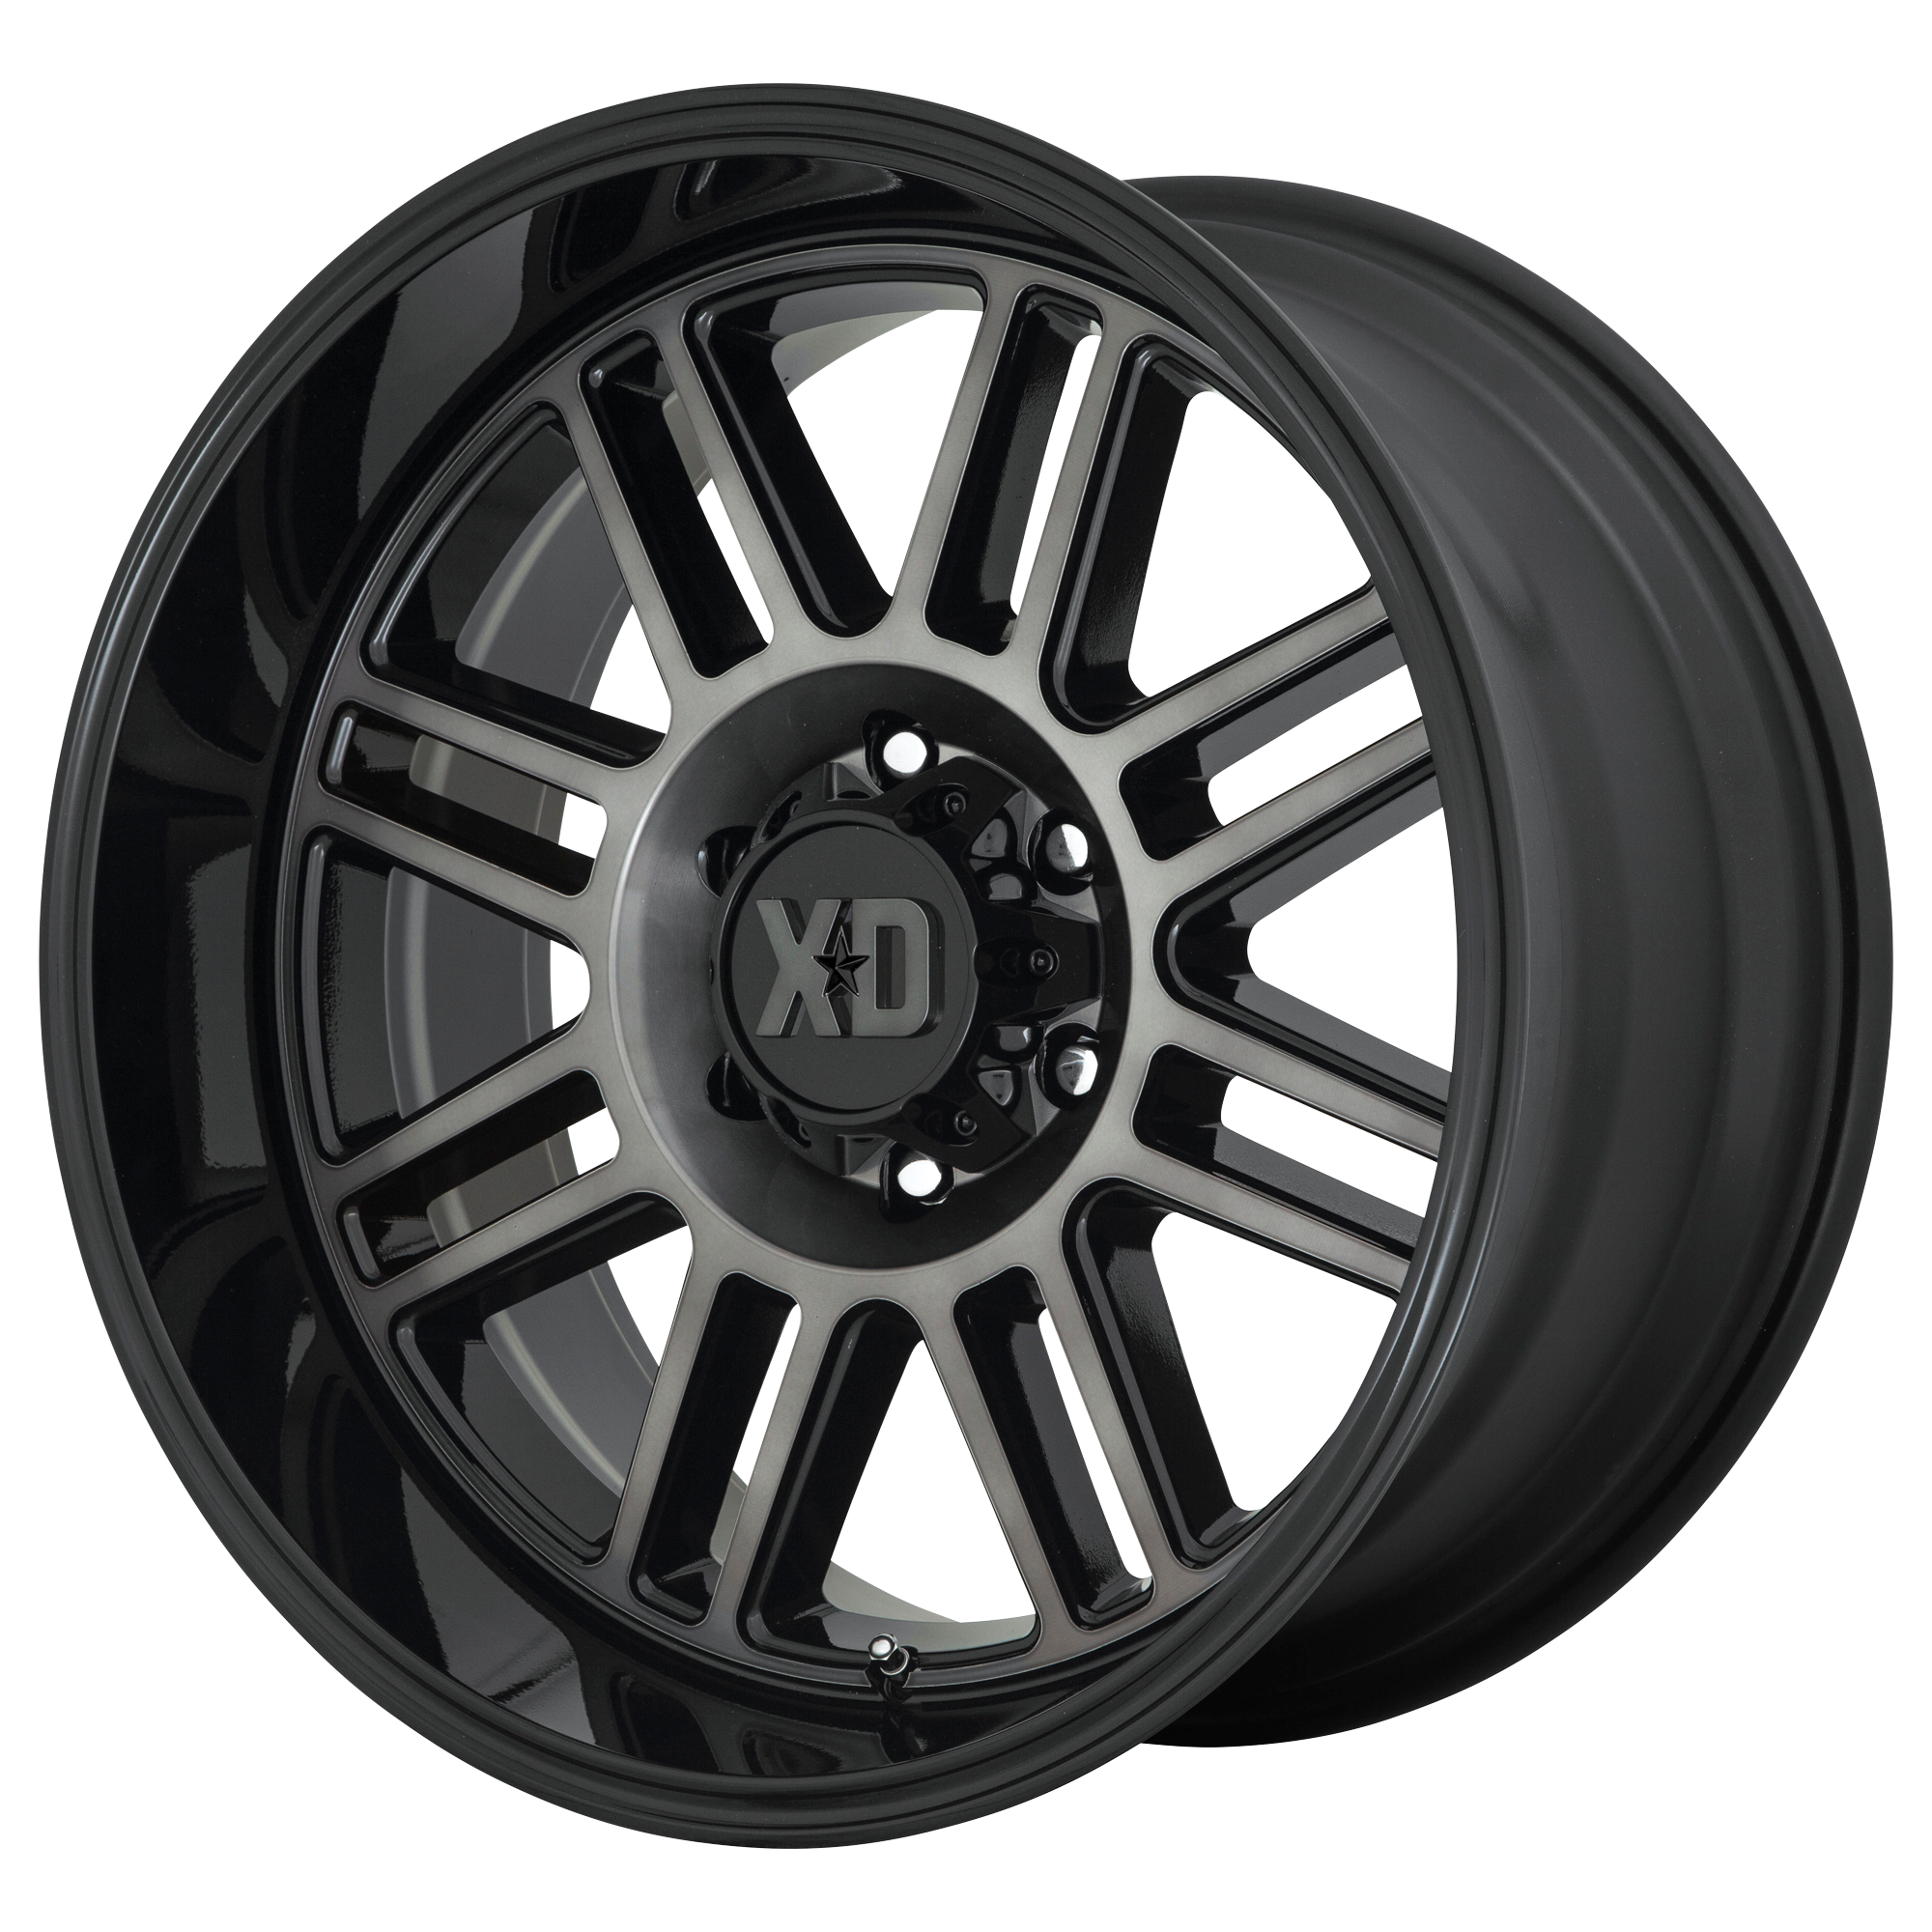 CAGE 20x10 6x135.00 GLOSS BLACK W/ GRAY TINT (-18 mm) - Tires and Engine Performance